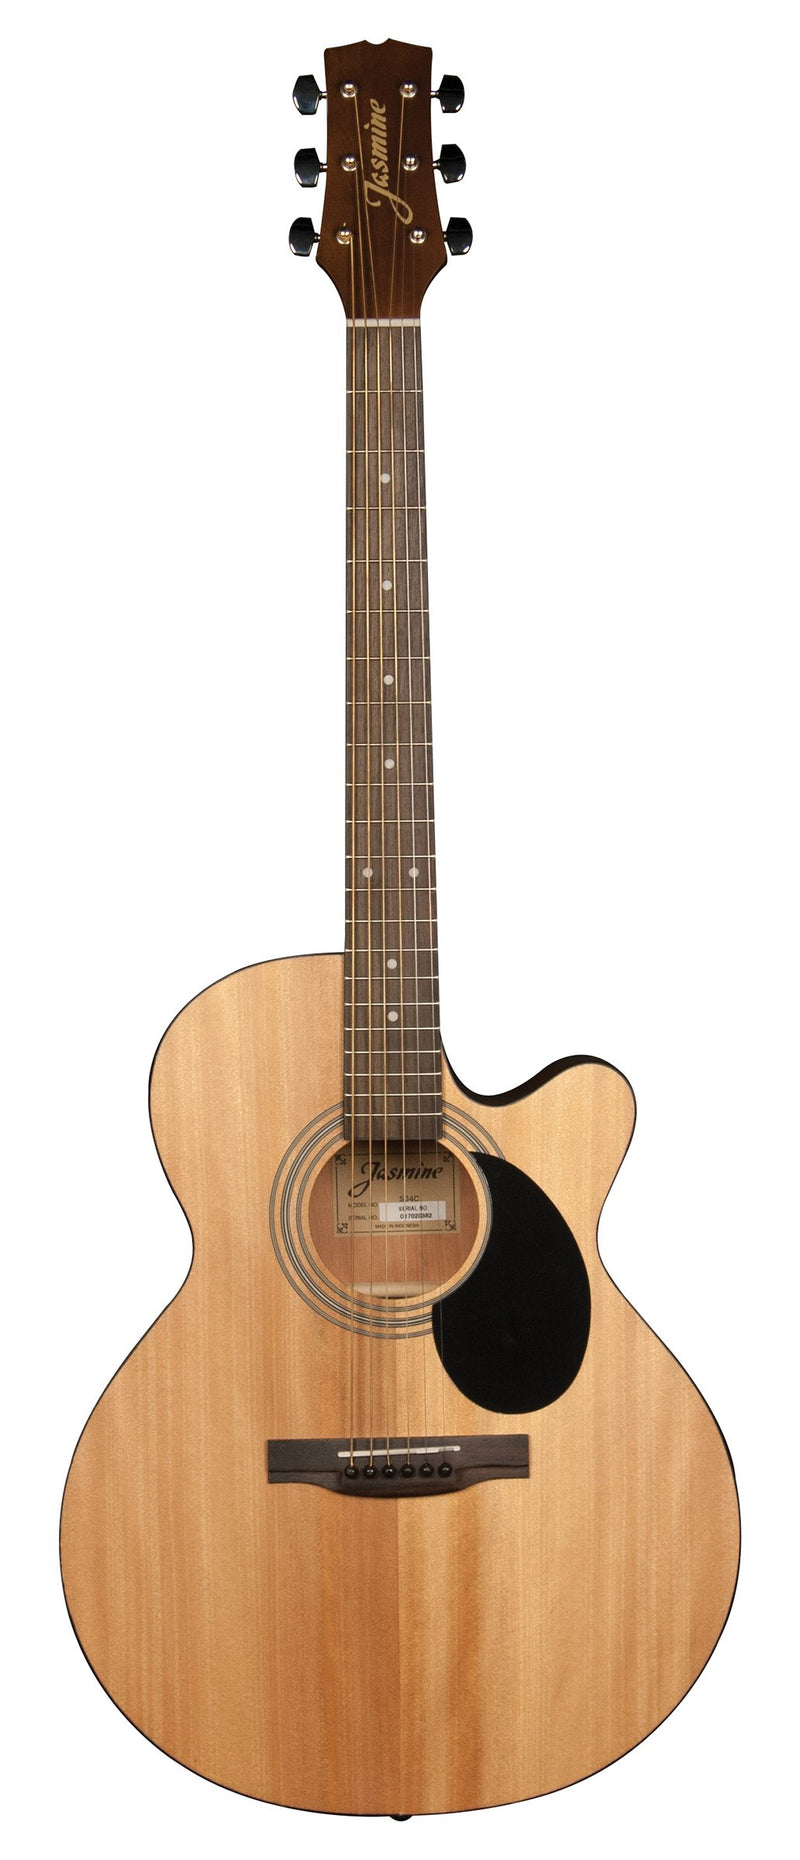 Jasmine Orchestra Style Acoustic Guitar - Natural - S34C